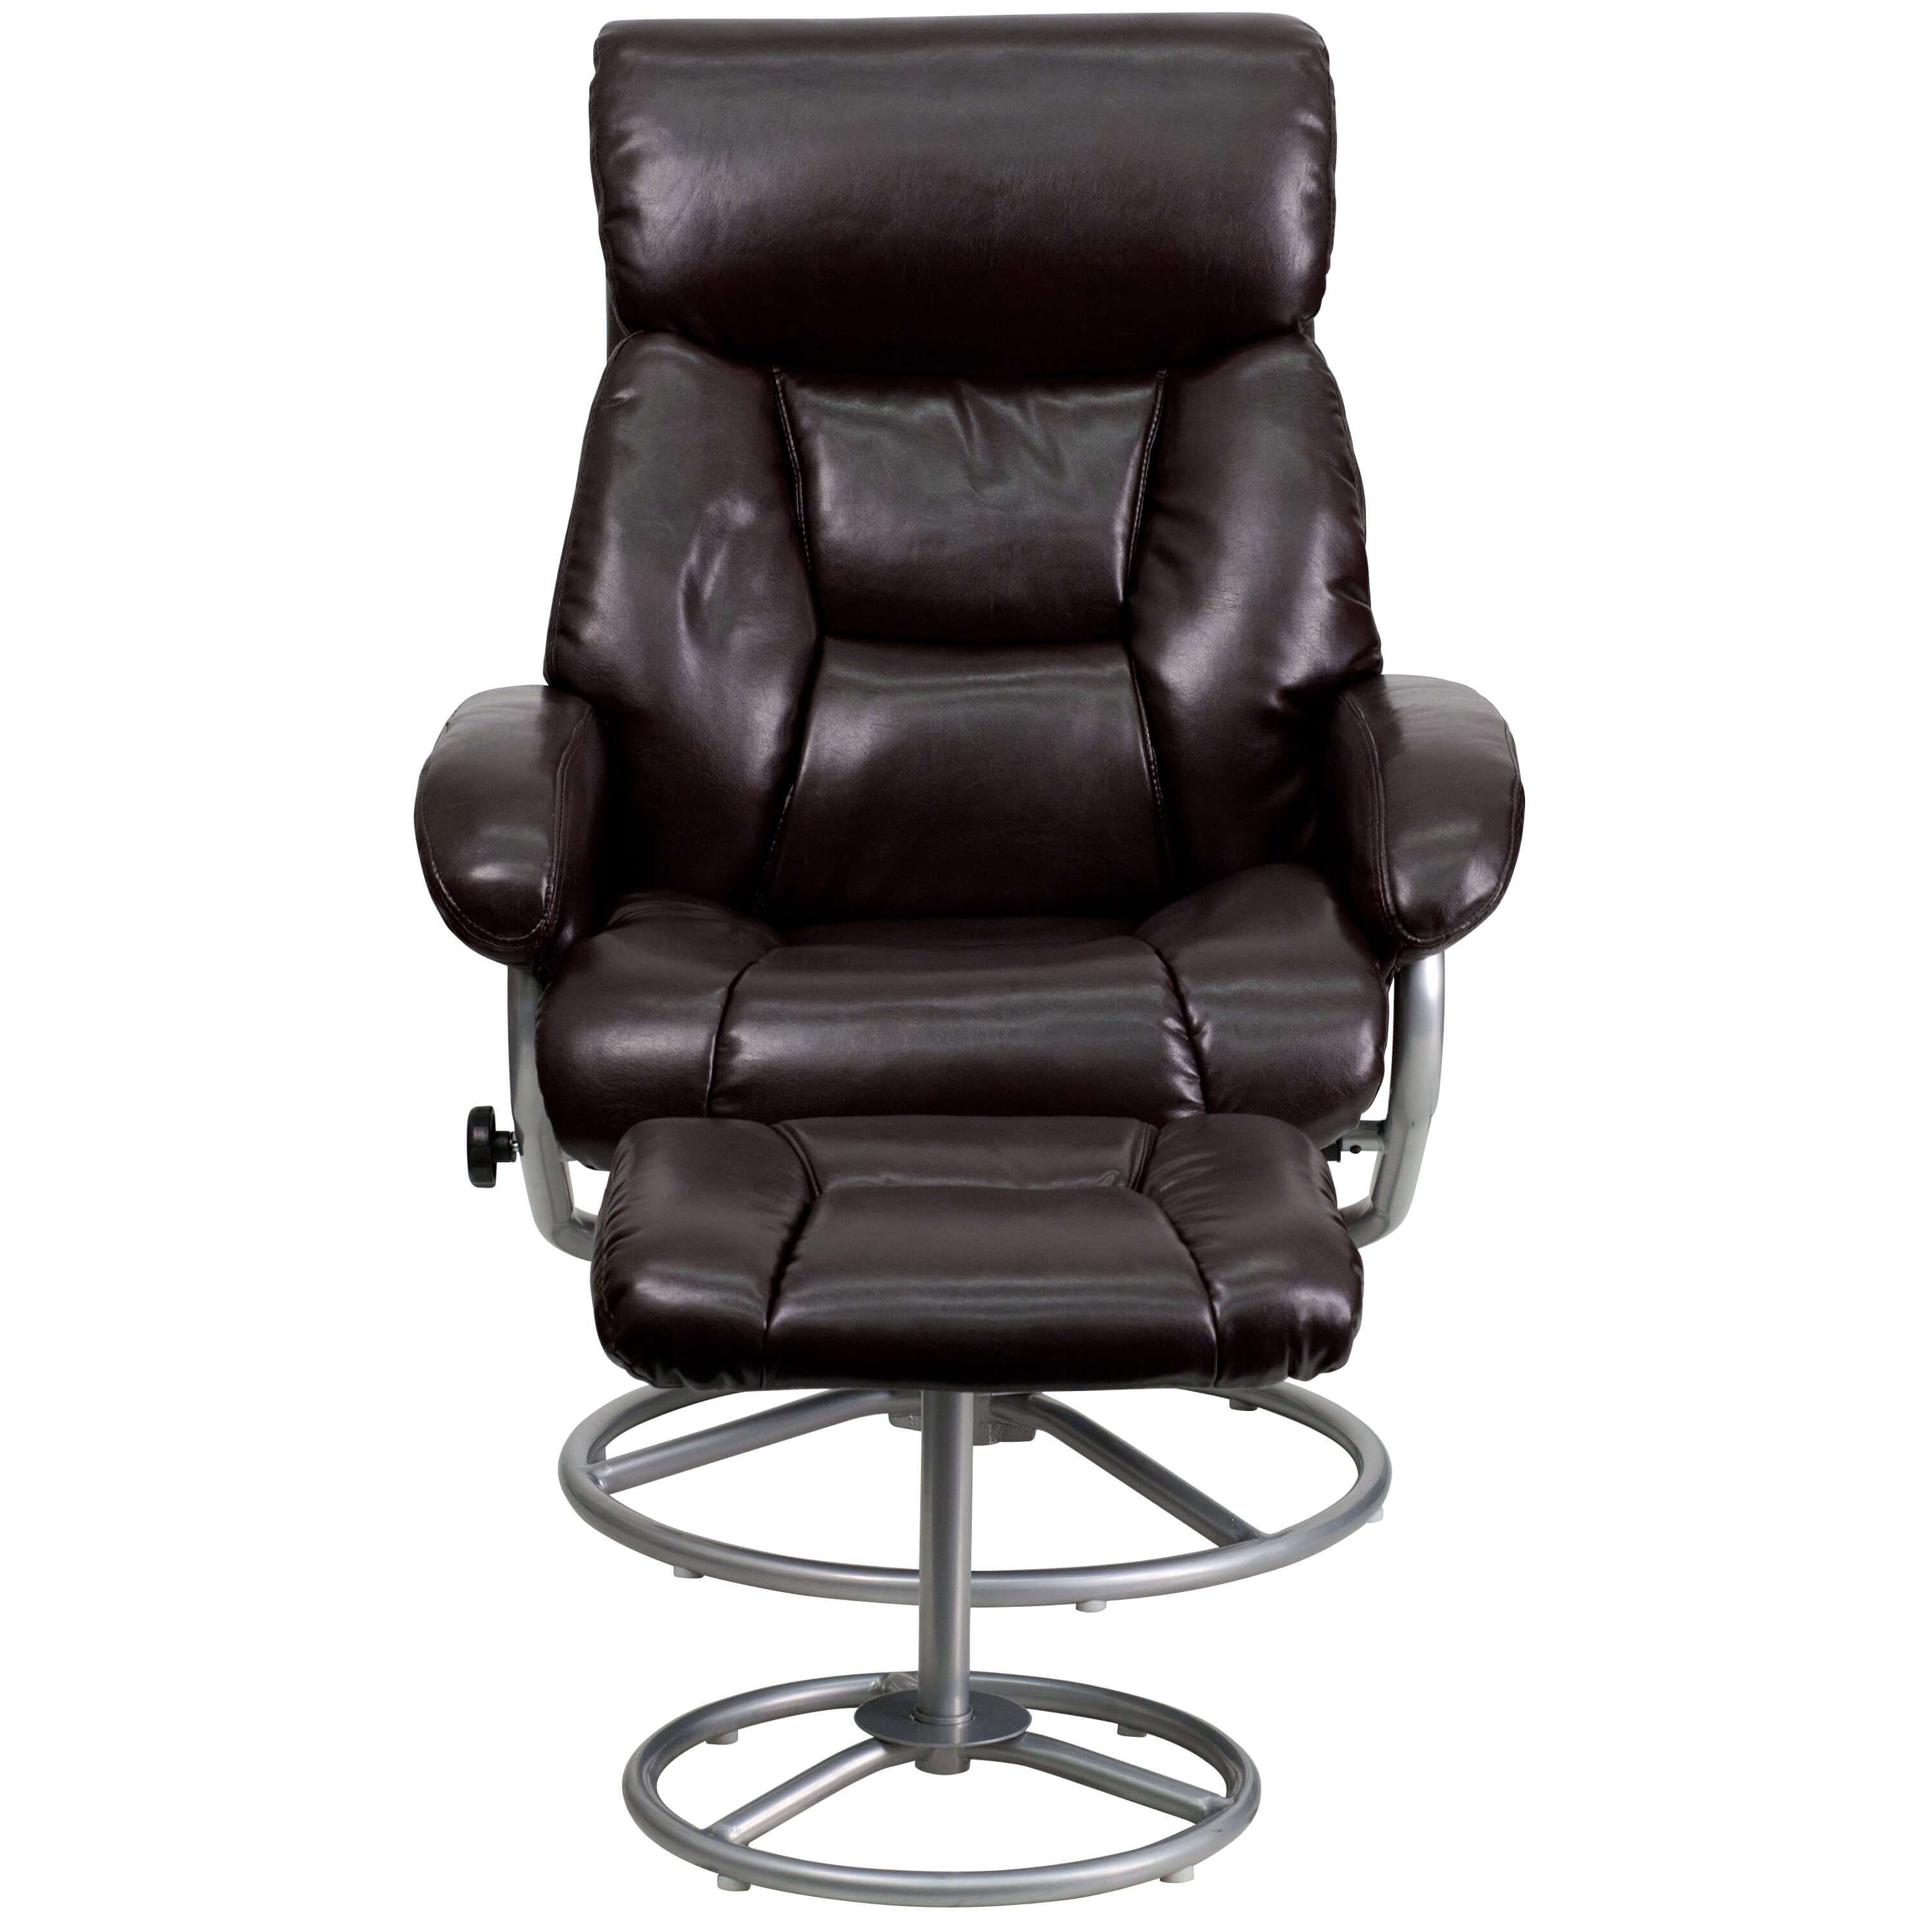 Contemporary leather recliners front view